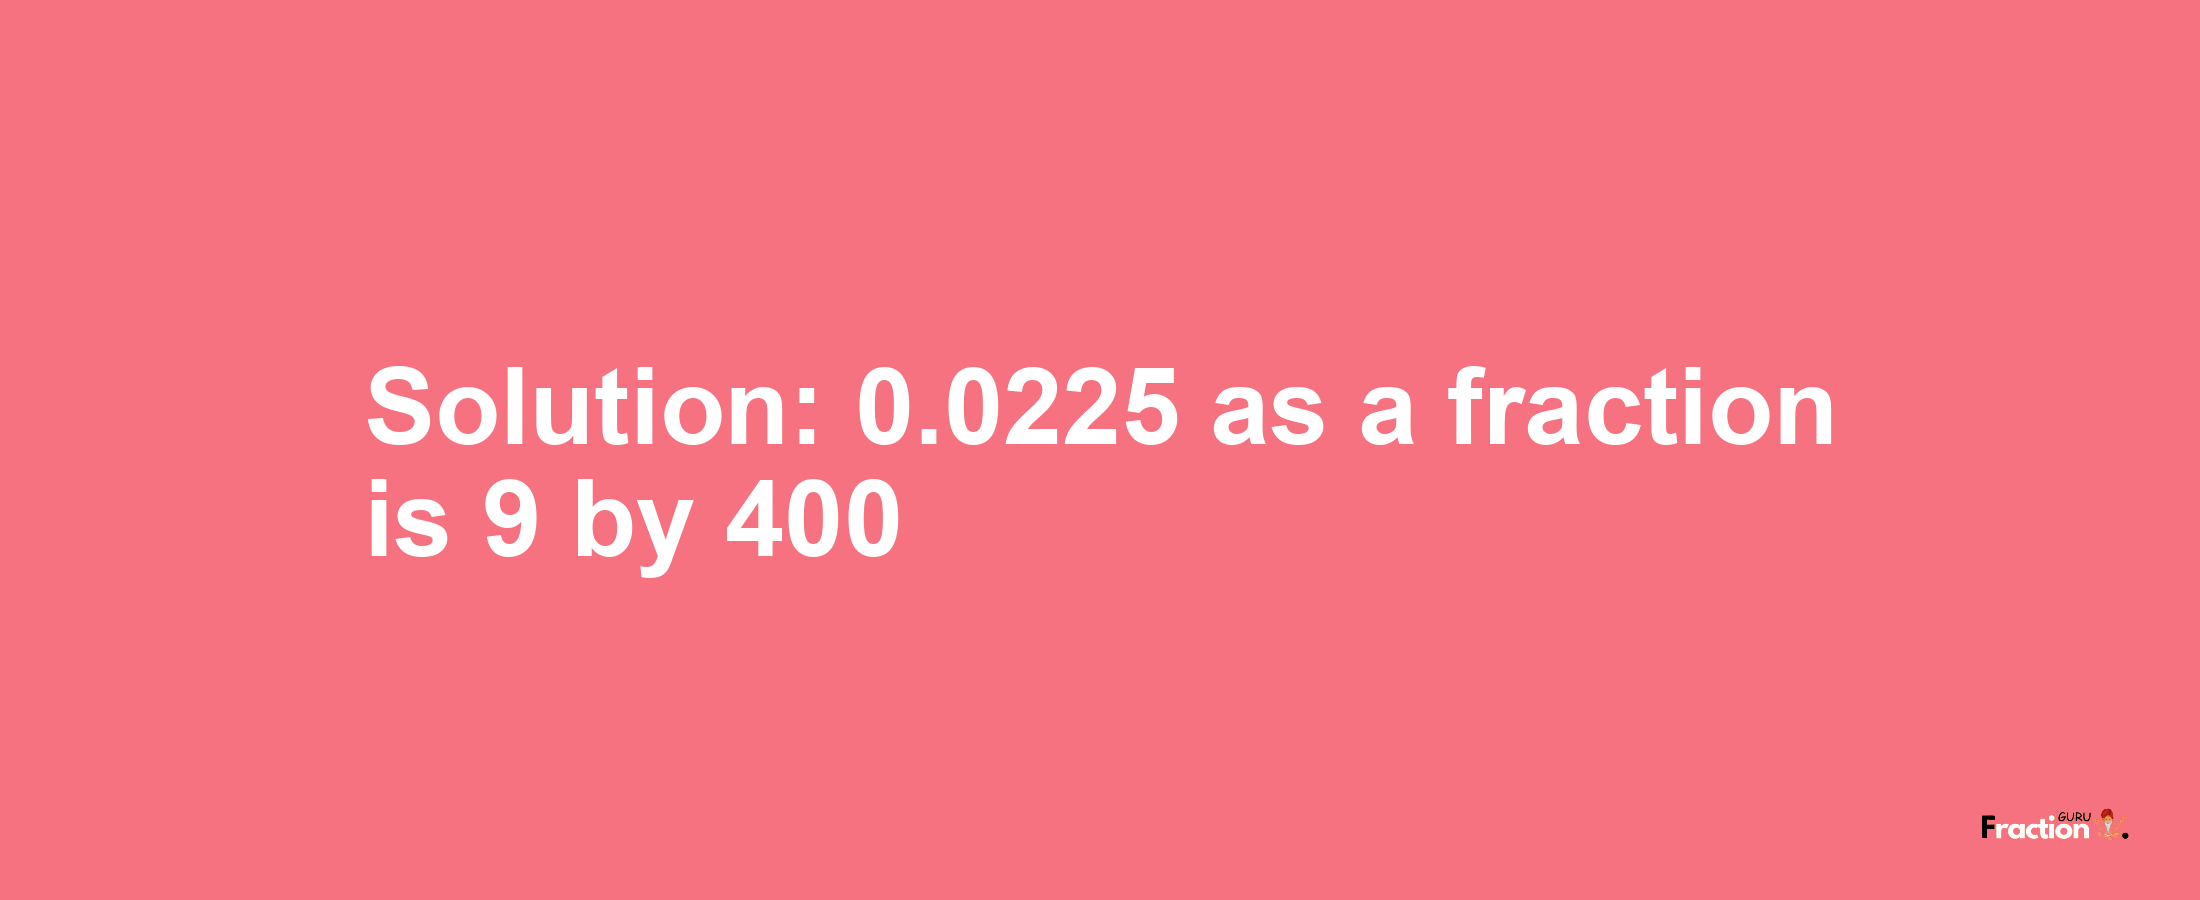 Solution:0.0225 as a fraction is 9/400